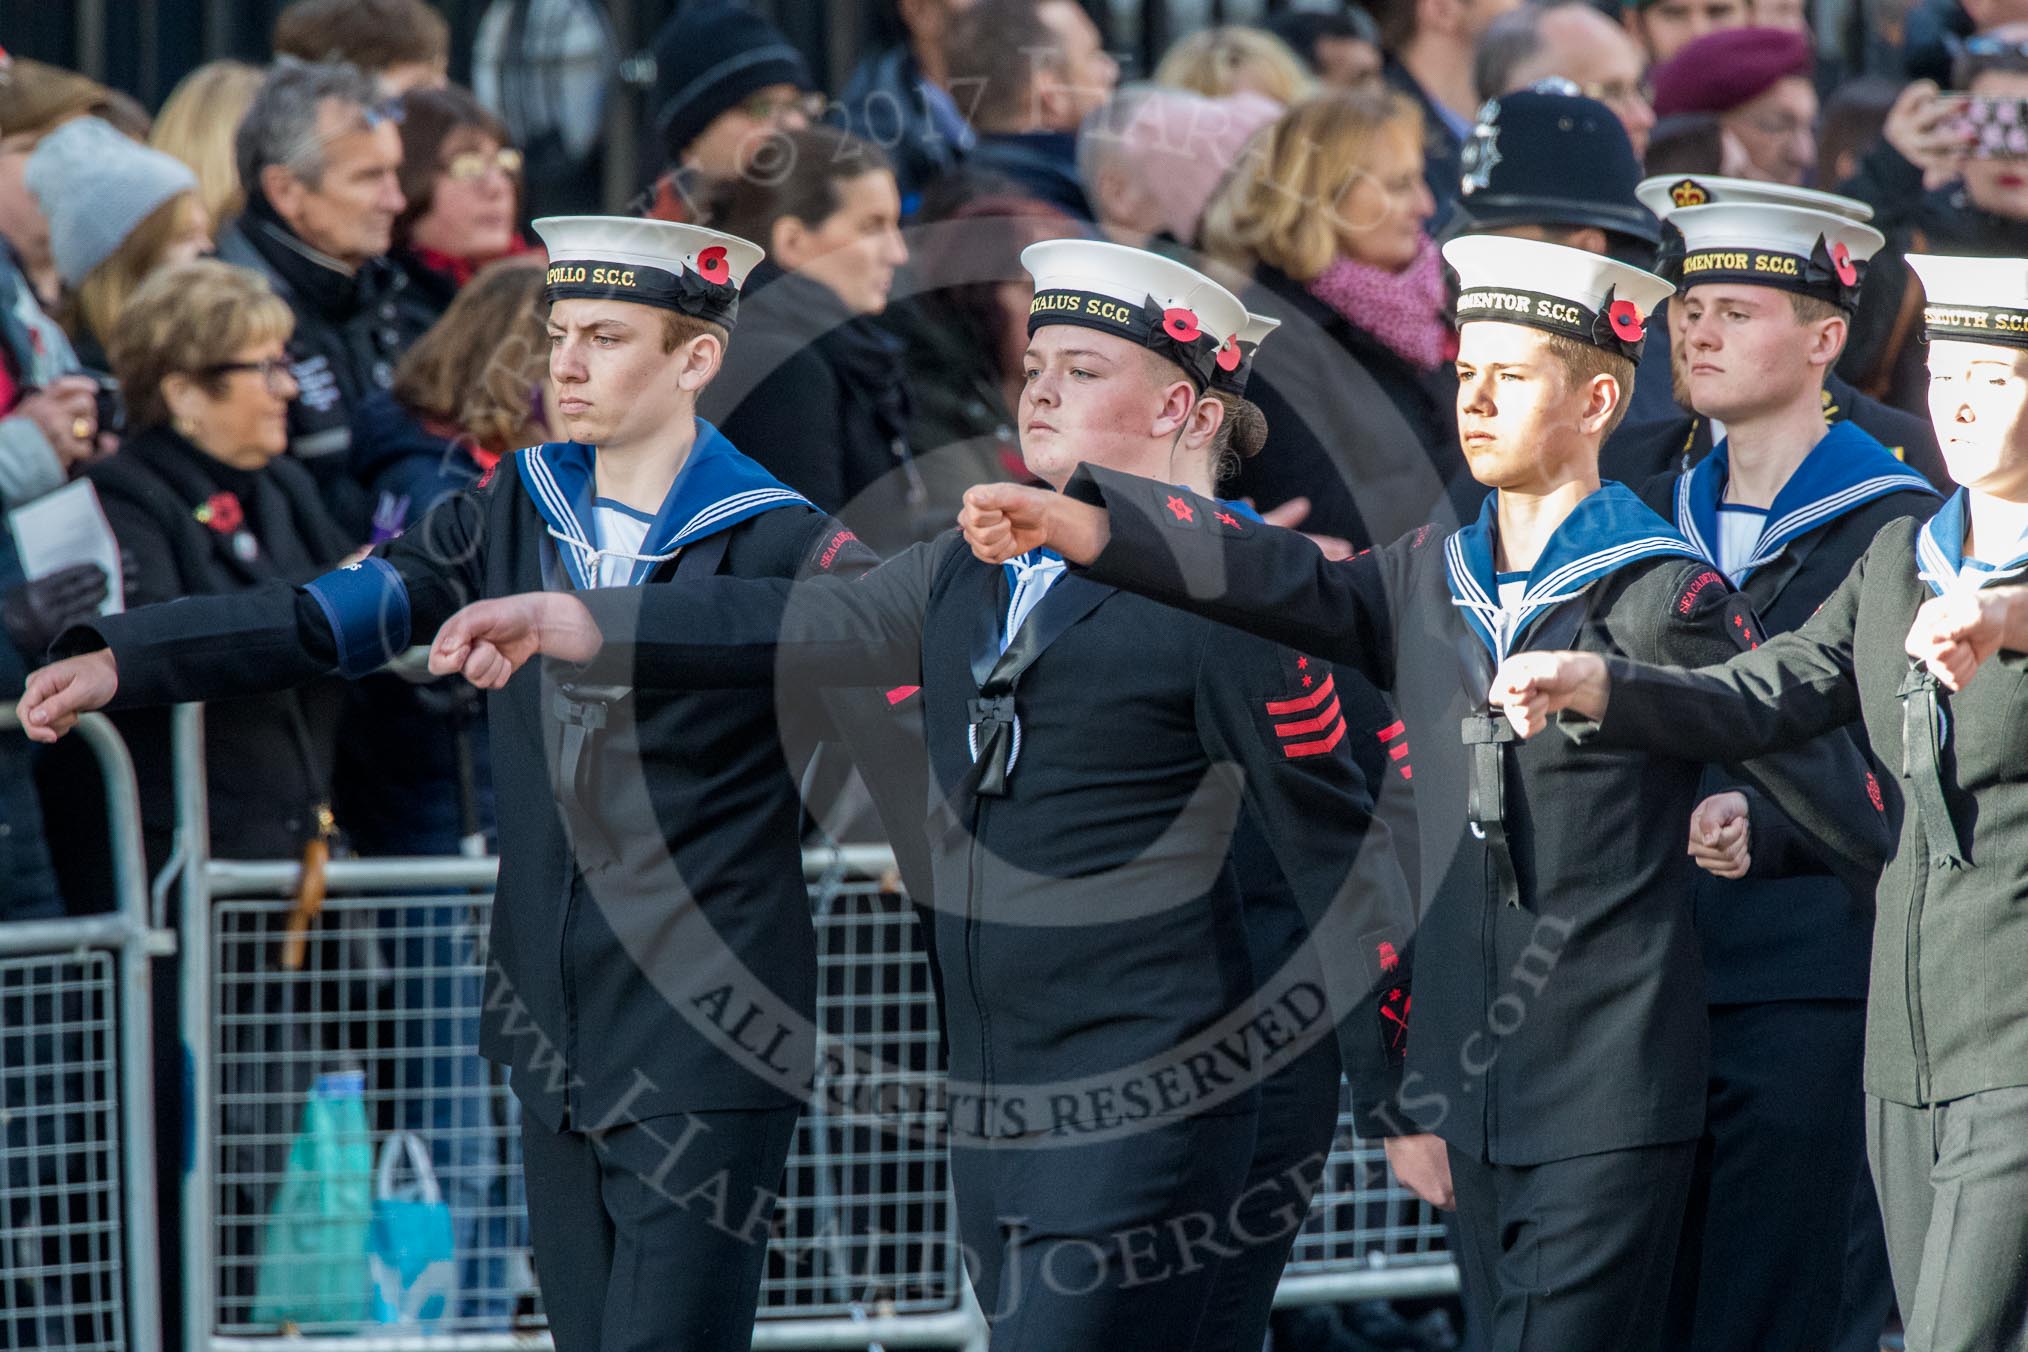 Sea Cadets Corps (Group M35, ?? members) during the Royal British Legion March Past on Remembrance Sunday at the Cenotaph, Whitehall, Westminster, London, 11 November 2018, 12:29.